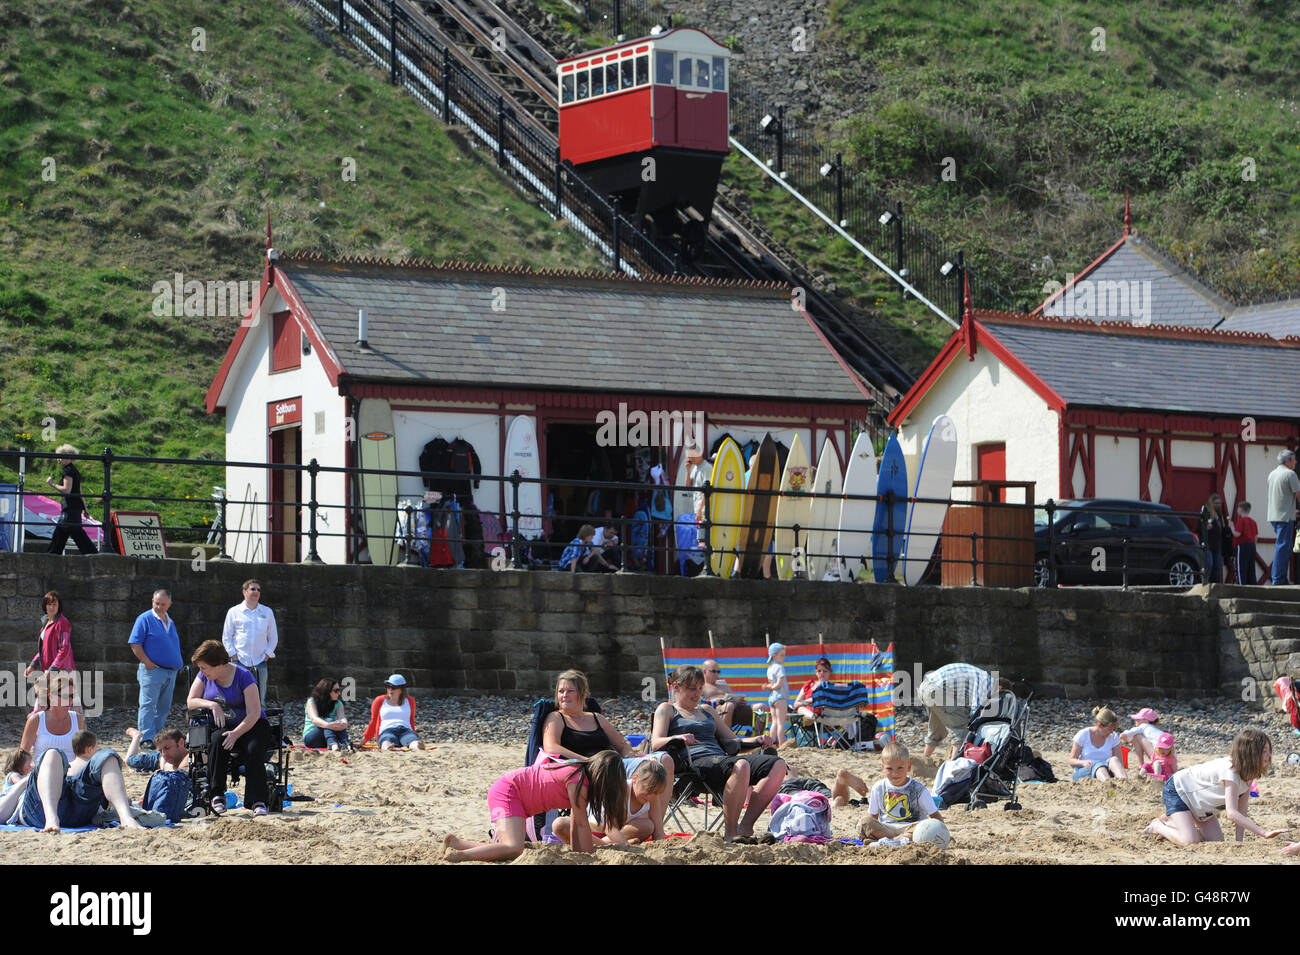 People enjoying the sun on Saltburn-by-the-Sea beach in Cleveland as the warm weather continues in parts of the UK. Stock Photo